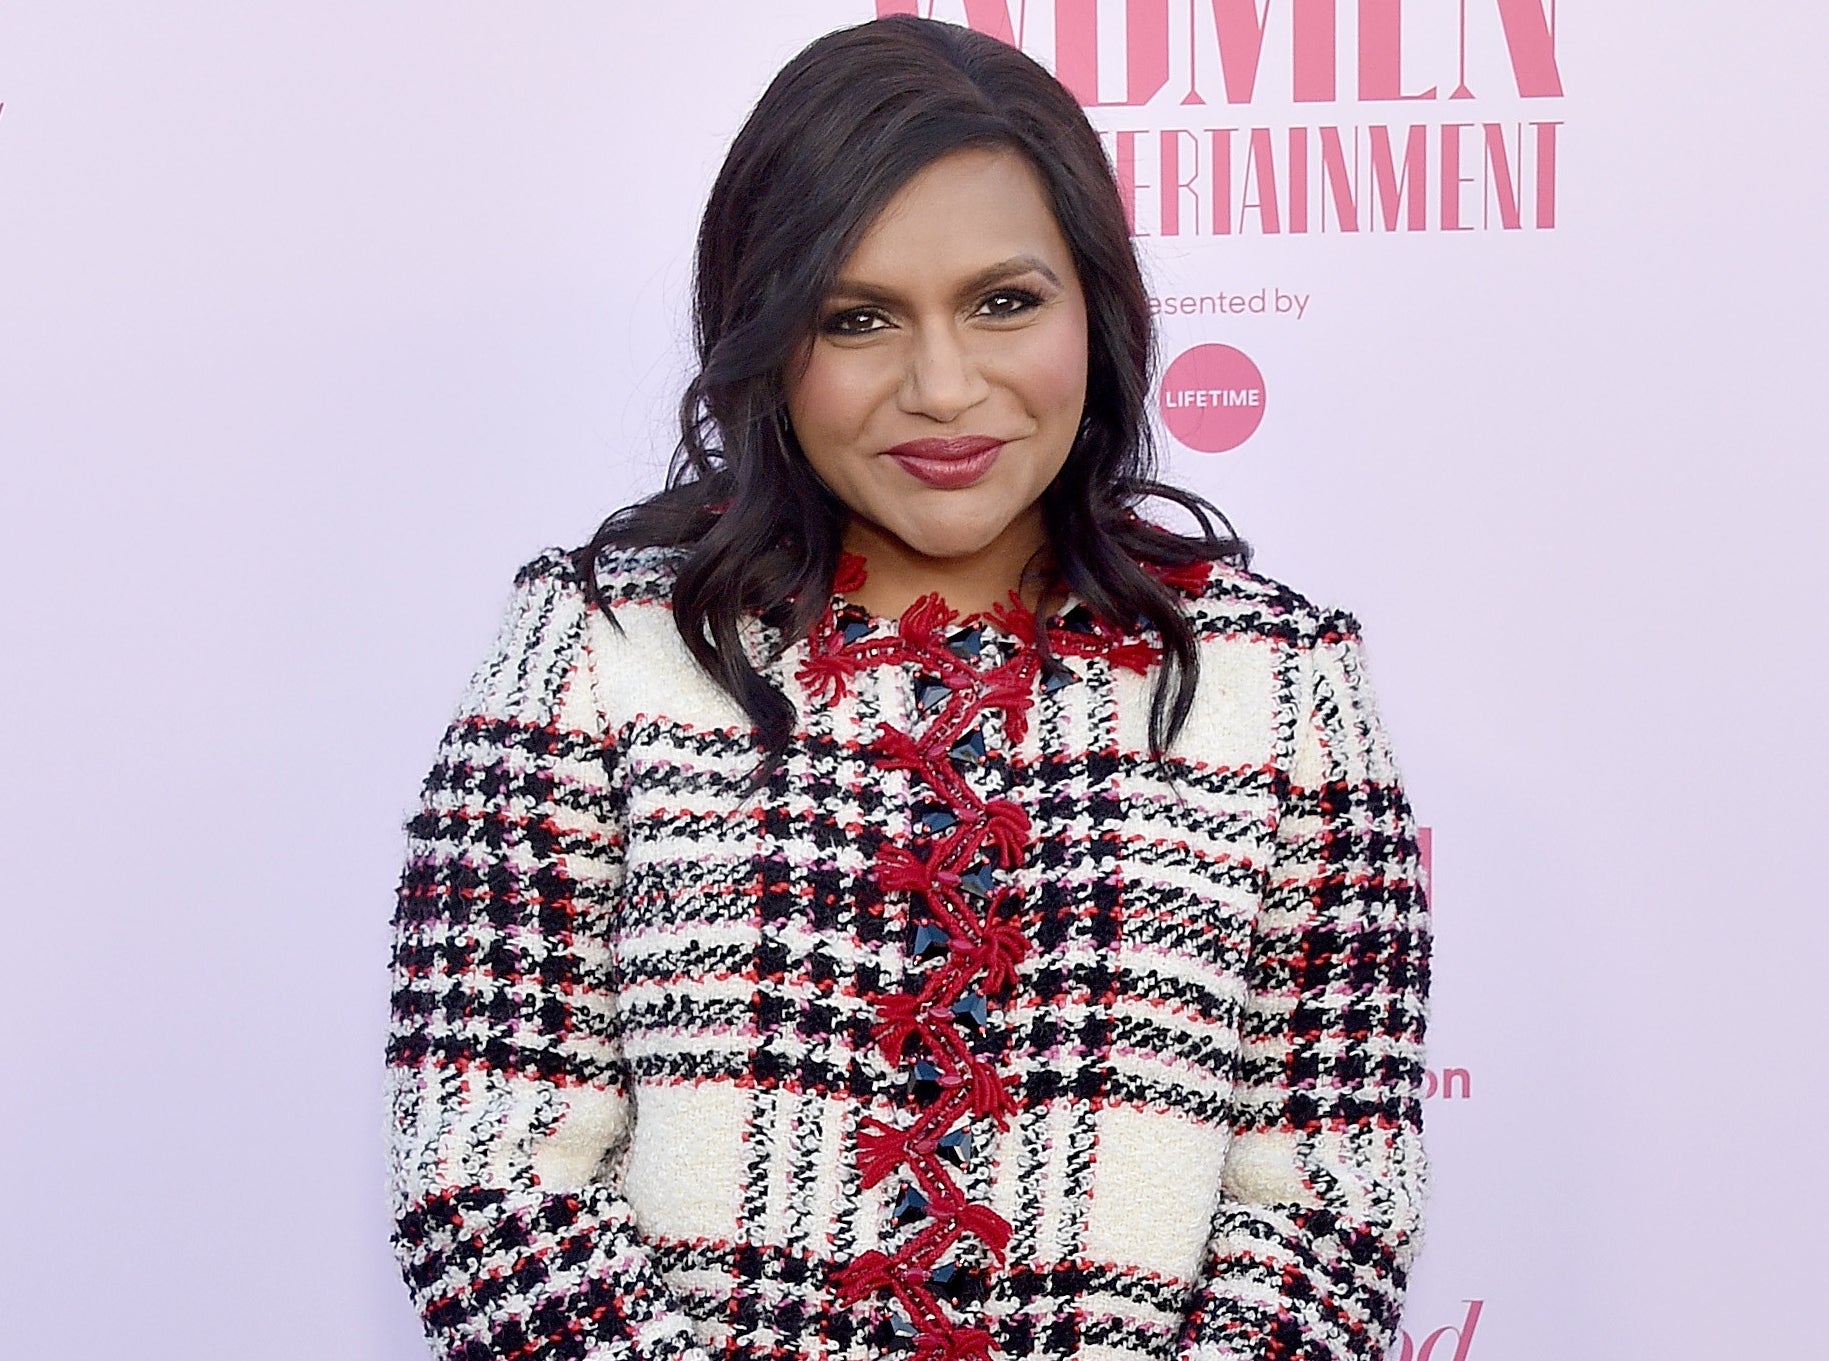 Mindy wears a white black and red tweed jacket